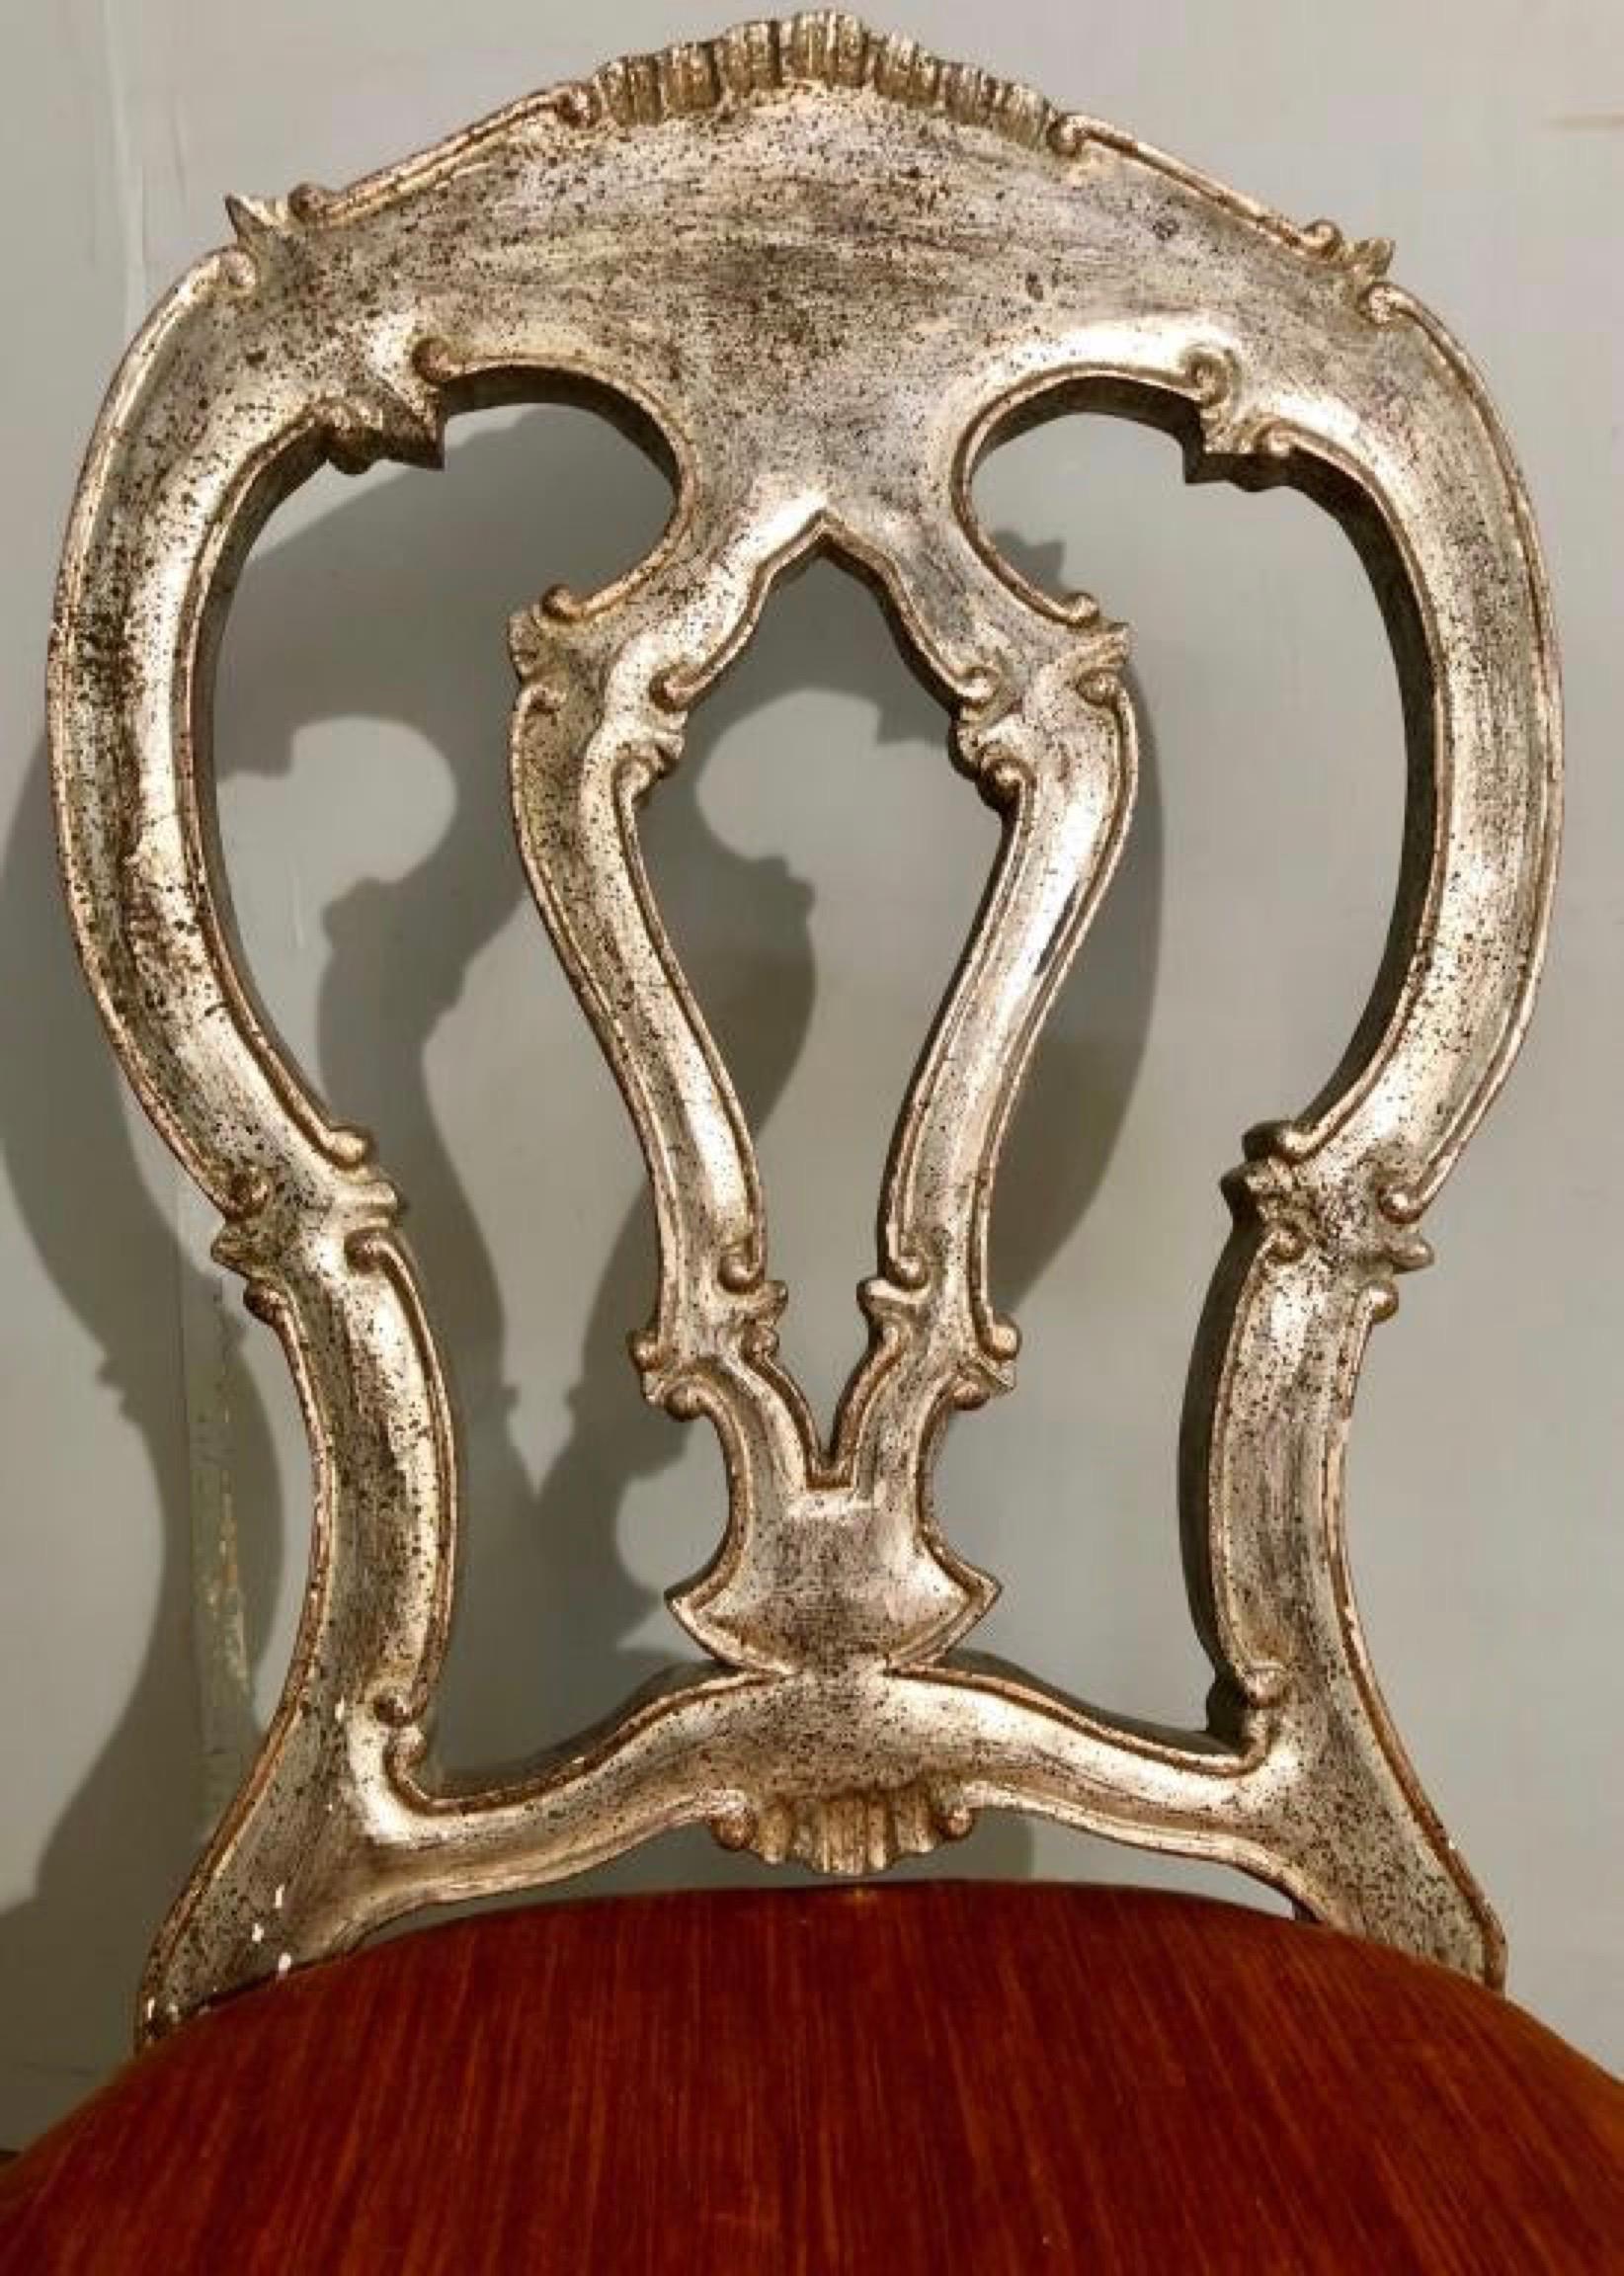 Pair of silver paint decorated Italian Rococo dining side chairs. Chairs are wonderfully carved in the Grotto fashion with arched backs supported by gently scalloped apron and cabriole legs. Upholstered seats shows wear. Great as extra dining room